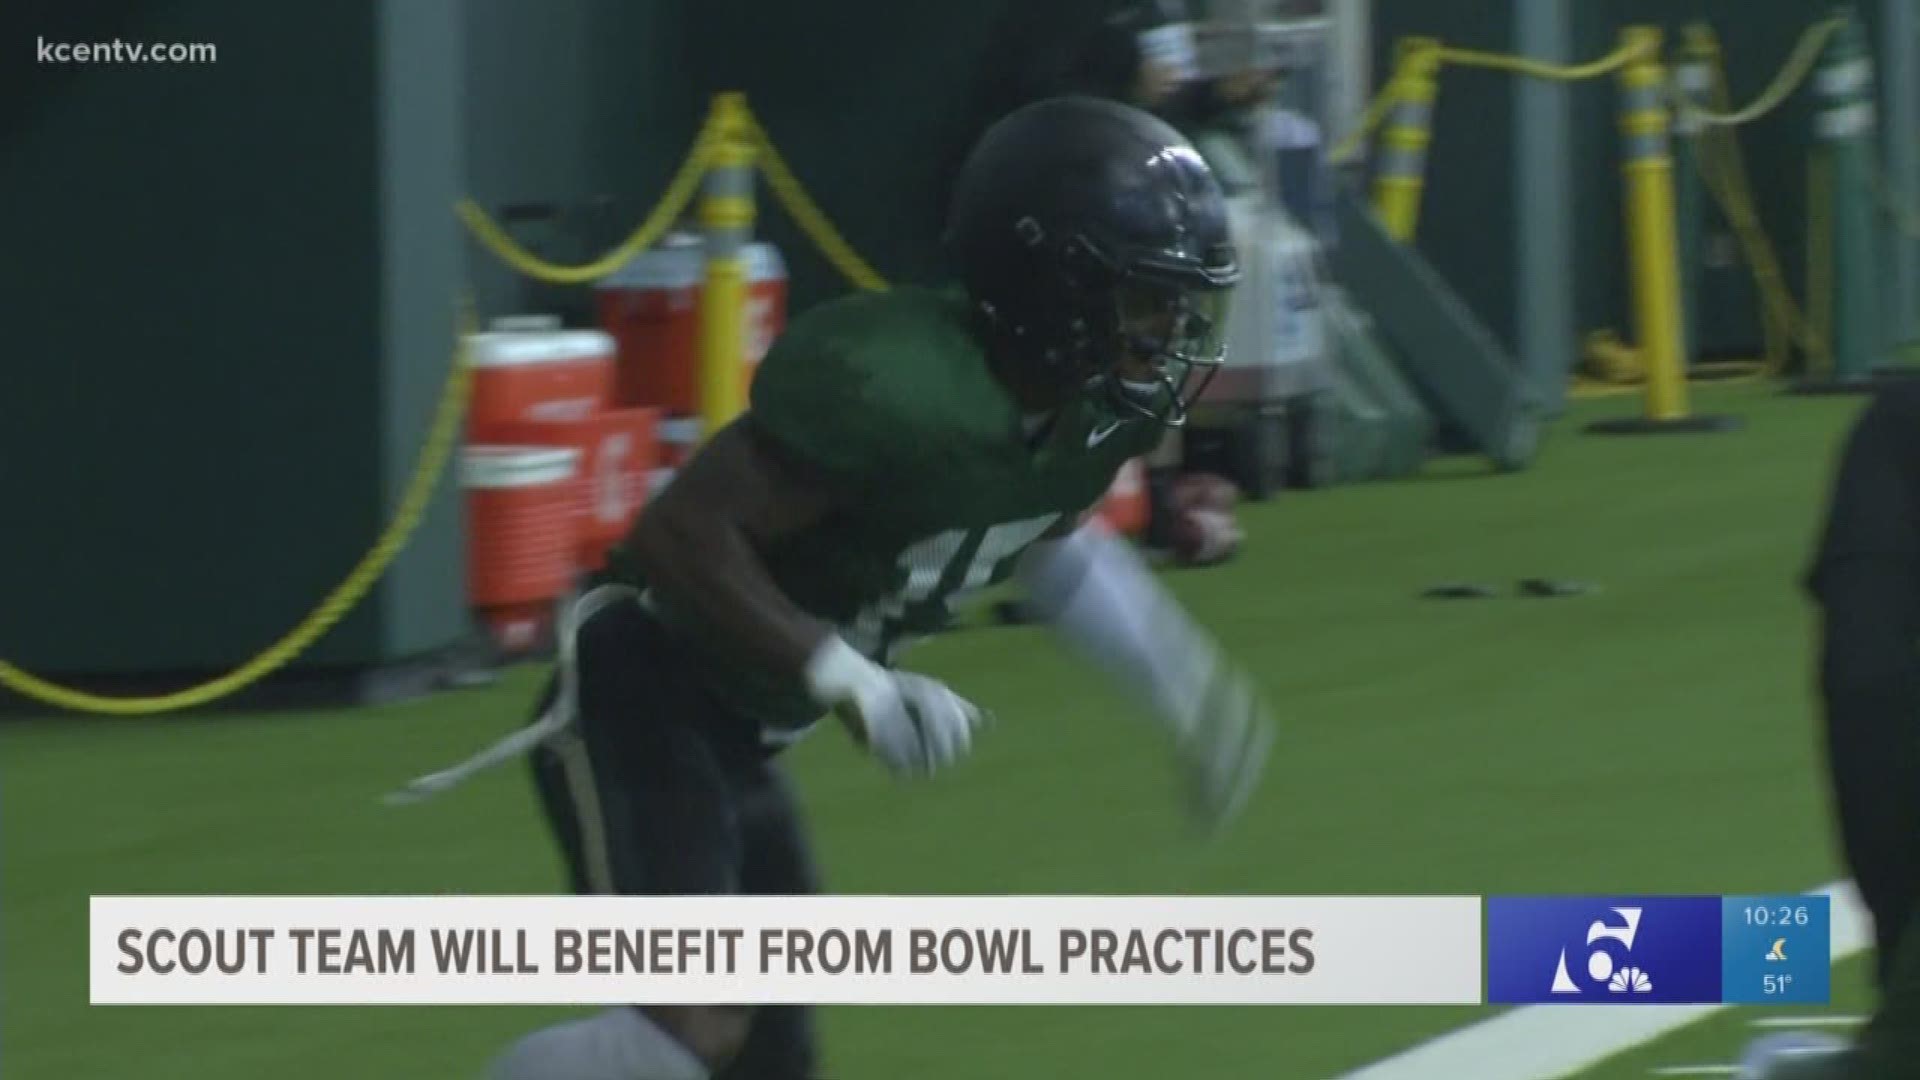 Rhule feels underclassmen will benefit from bowl practices